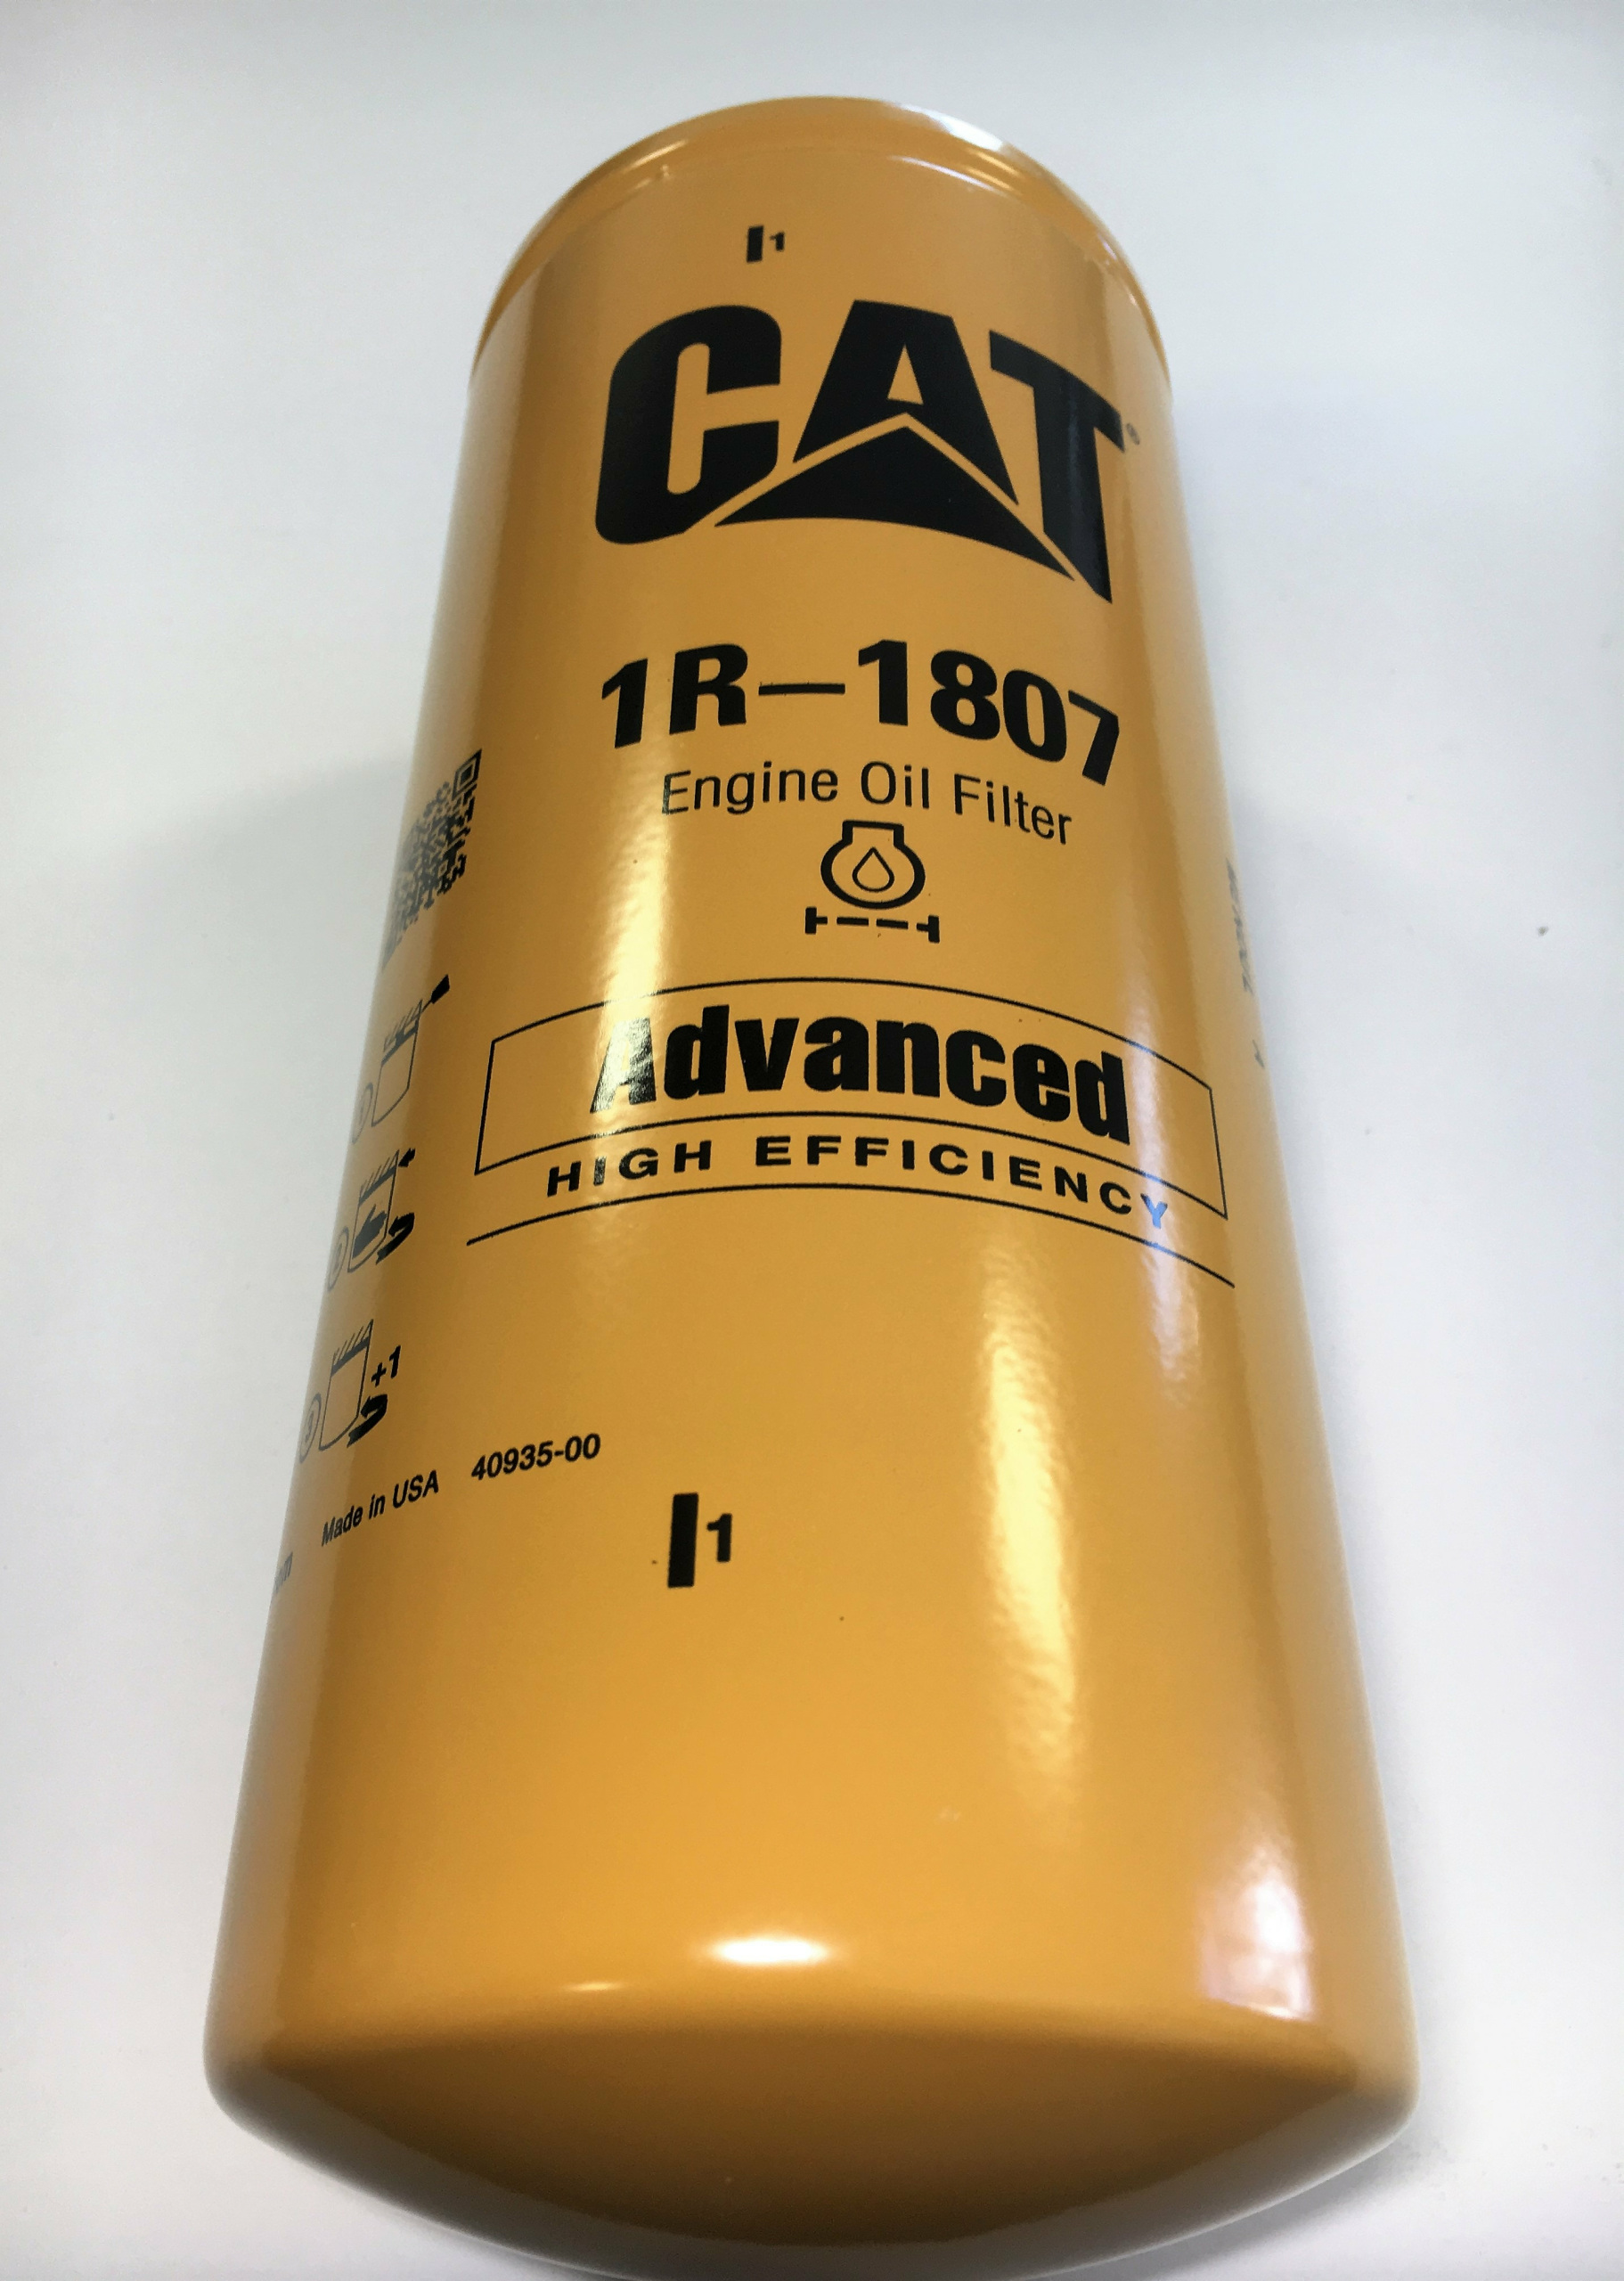 Cat Oil Filter 1r 1807 Cross Reference